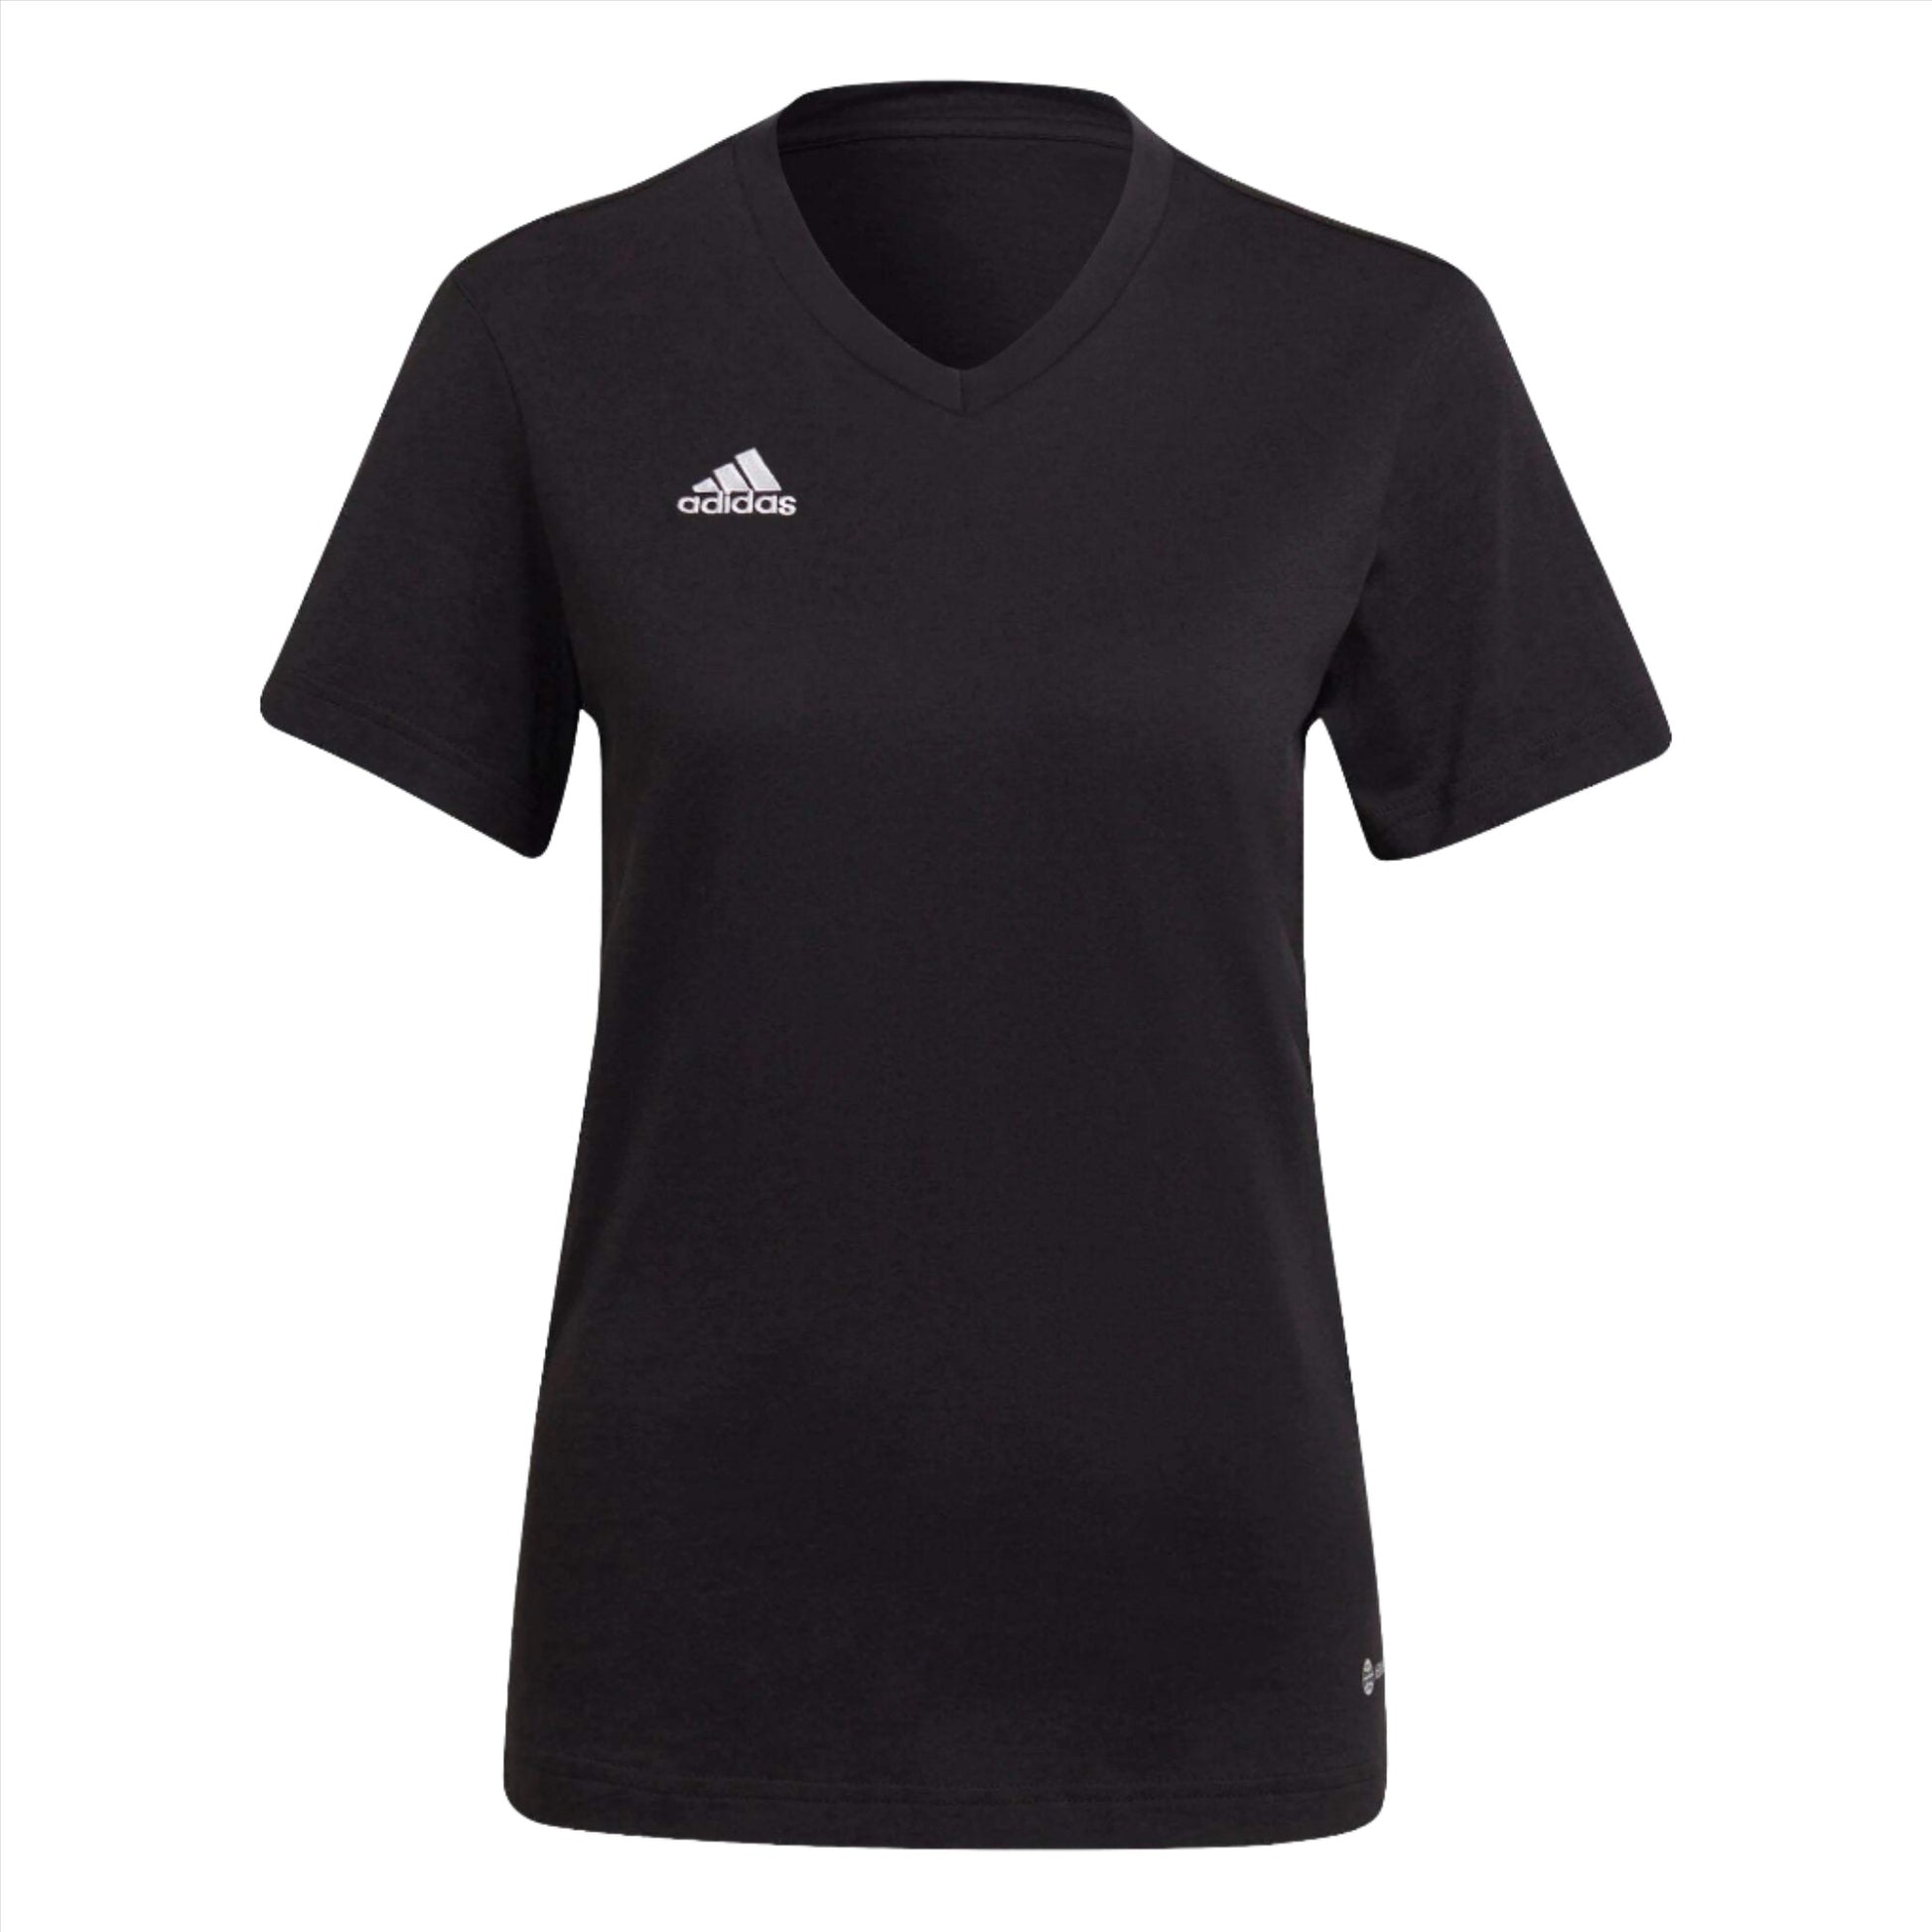 Entrada 22 Tee Ladies by Adidas - The Luxury Promotional Gifts Company Limited